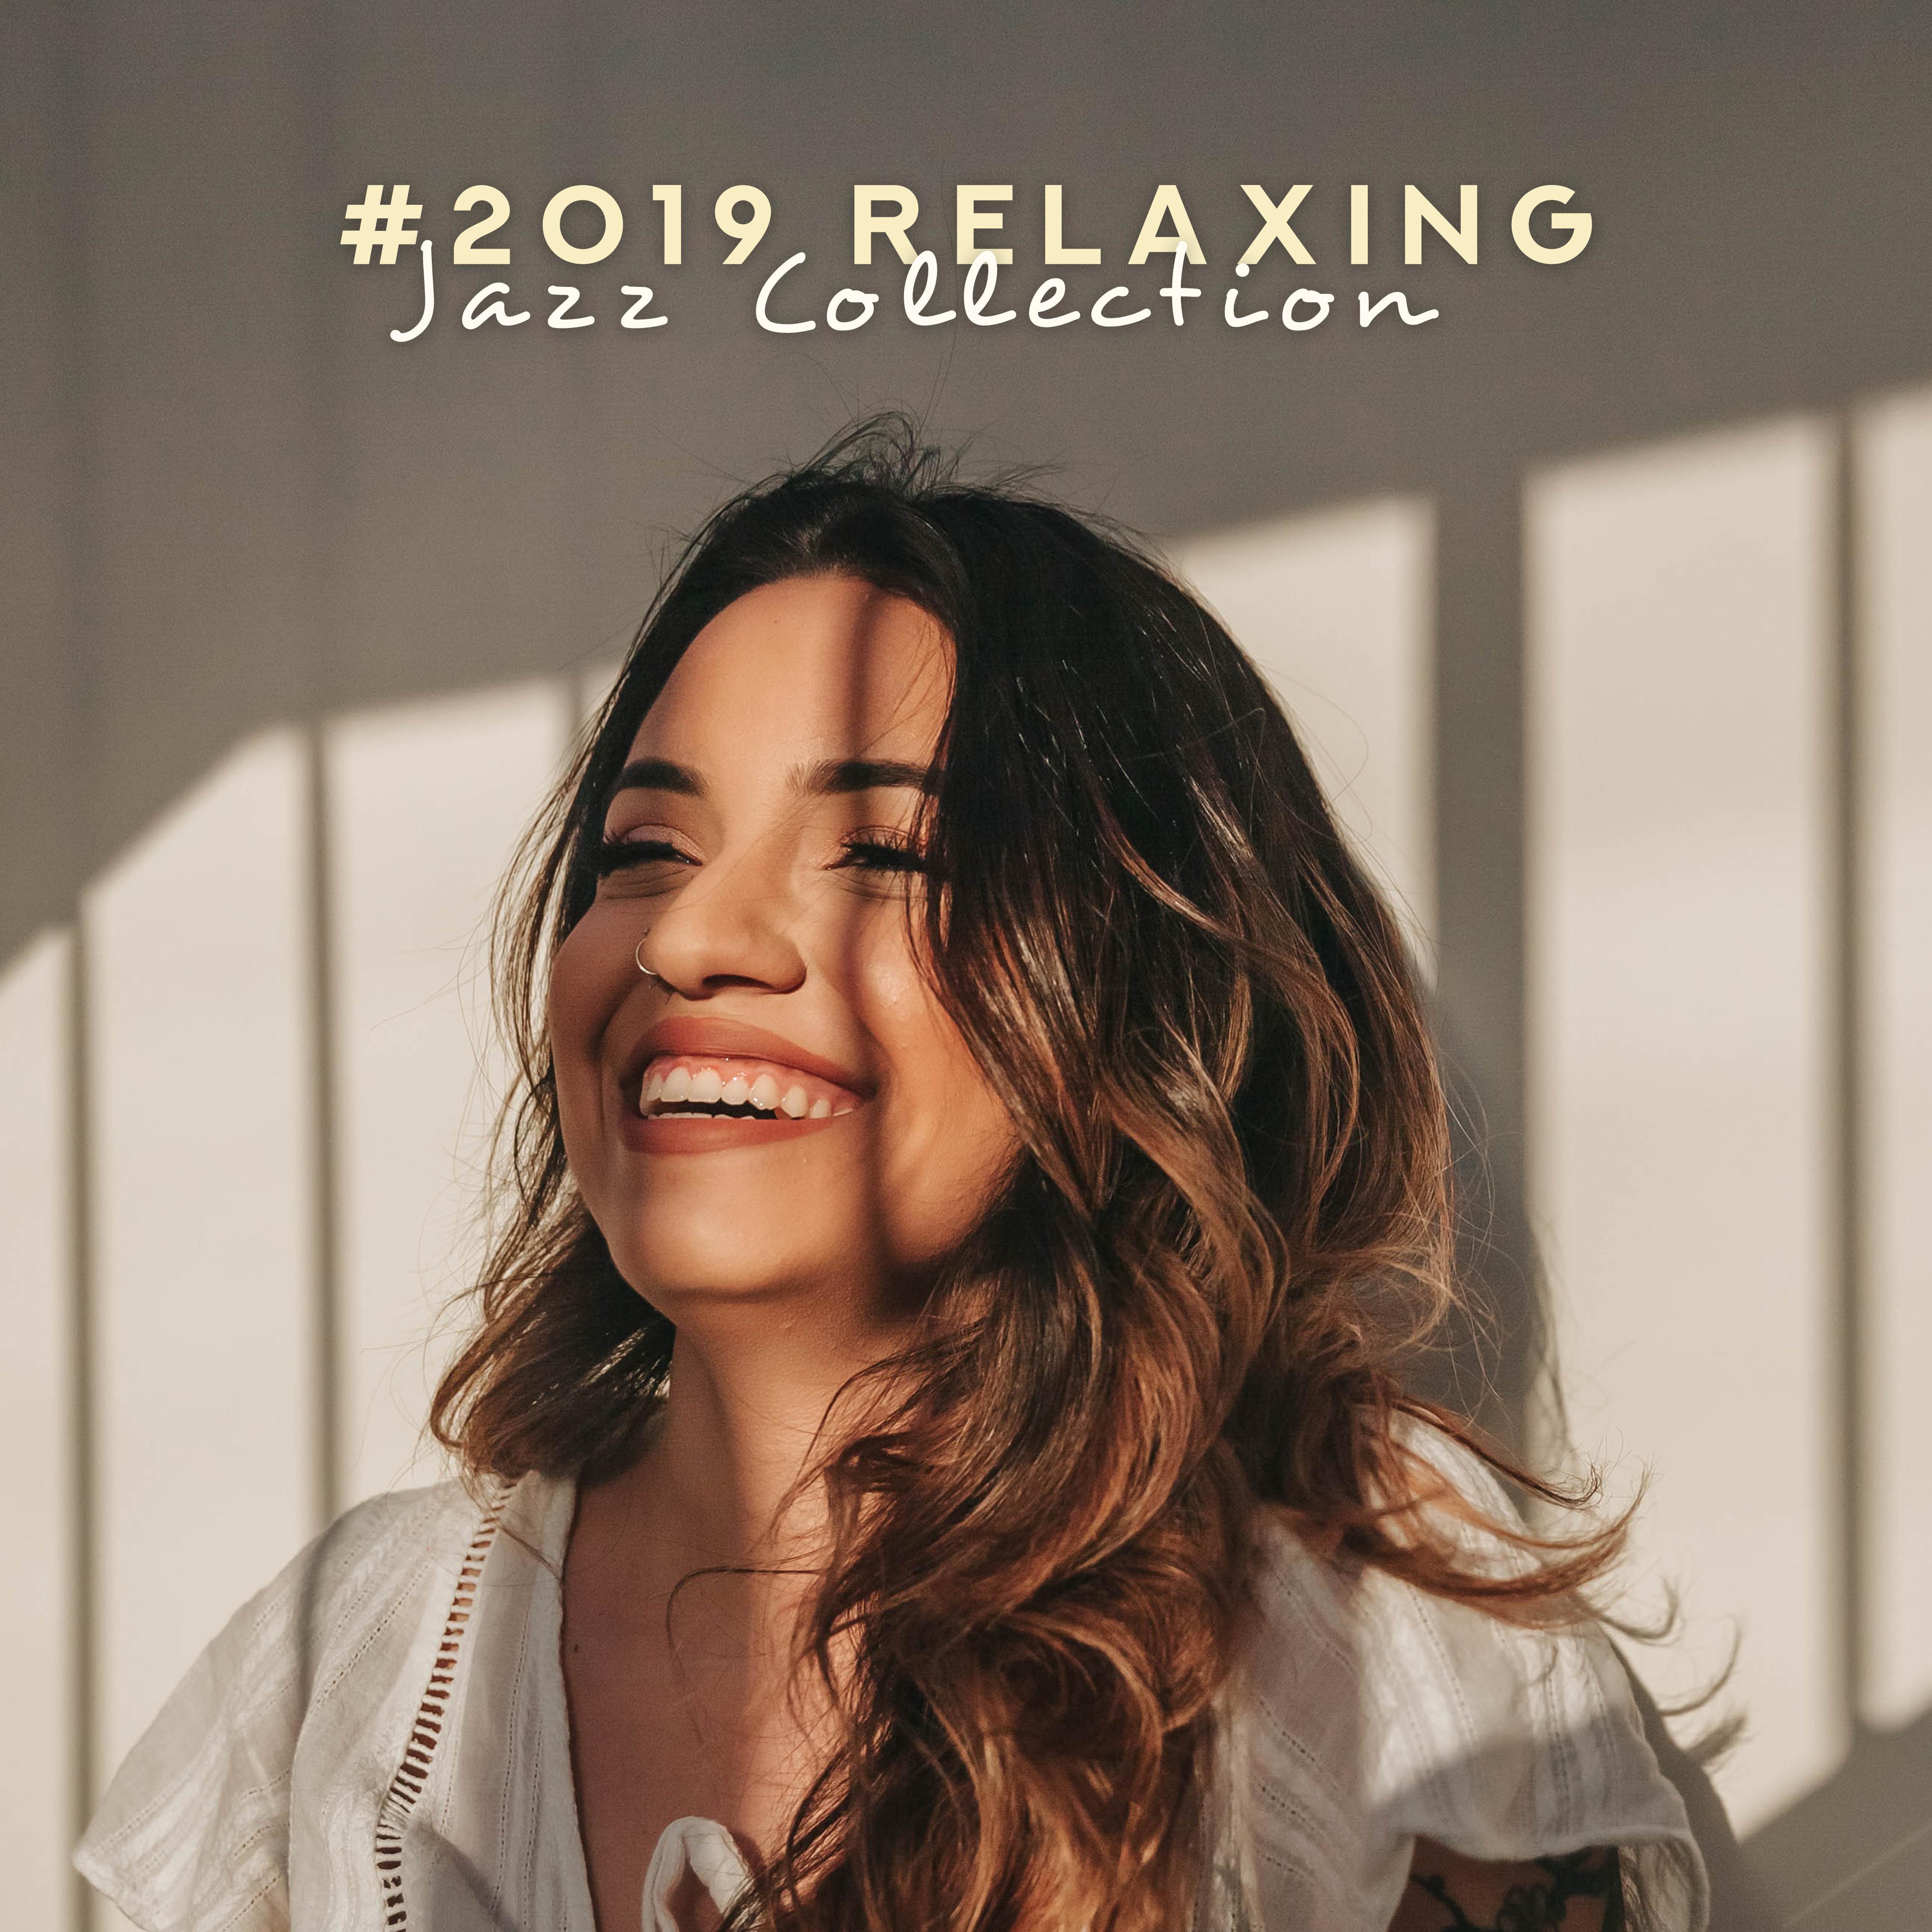 #2019 Relaxing Jazz Collection – Smooth Jazz 2019, Coffee Music, Instrumental Jazz to Rest, Sleep, Relax, Mellow Jazz 2019